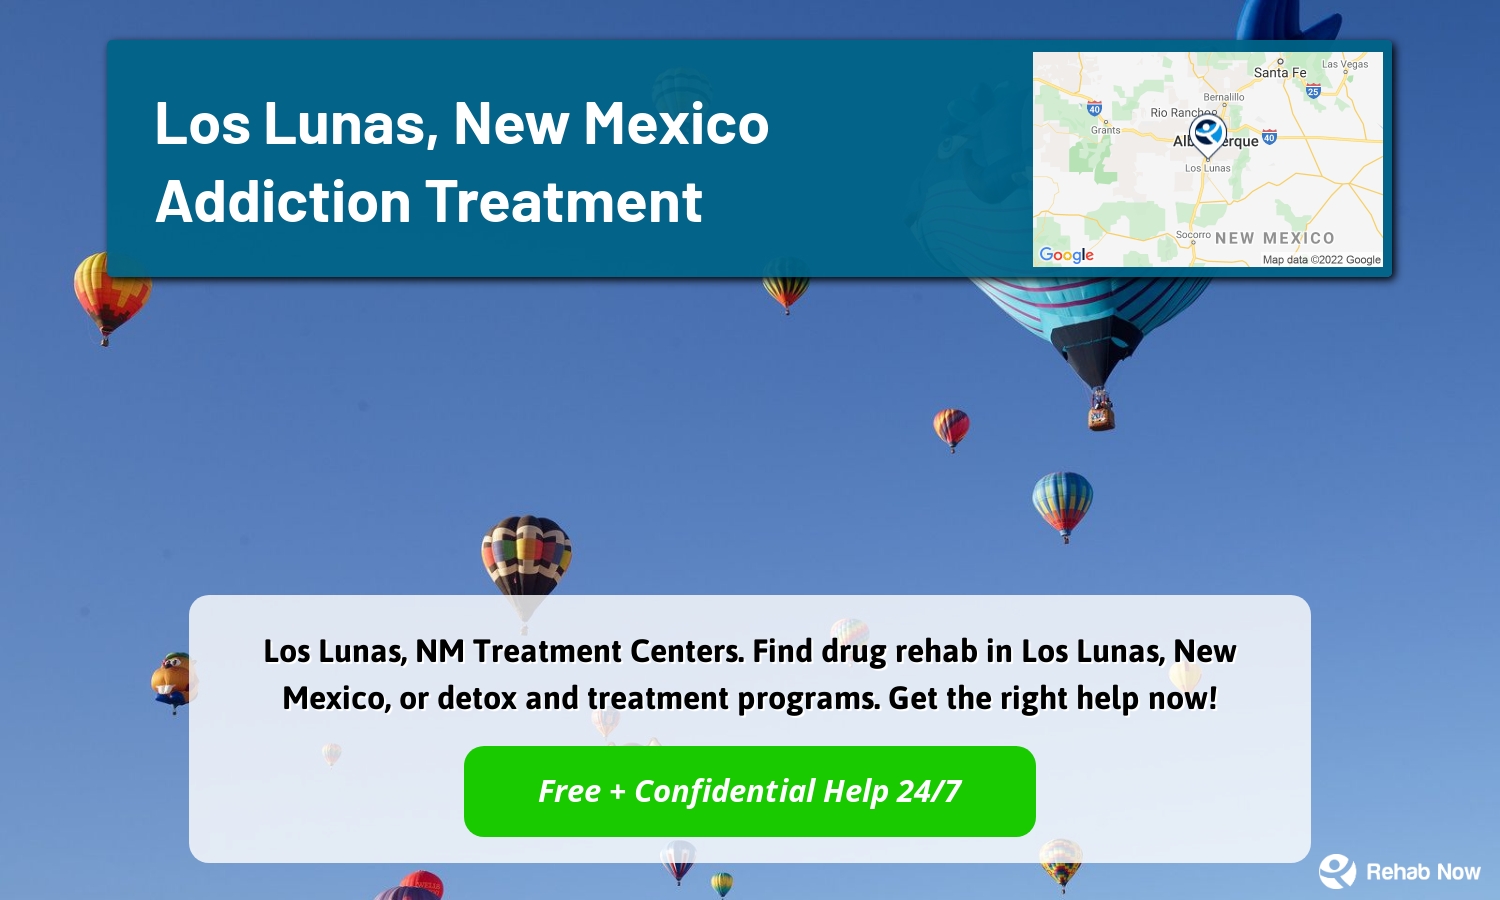 Los Lunas, NM Treatment Centers. Find drug rehab in Los Lunas, New Mexico, or detox and treatment programs. Get the right help now!